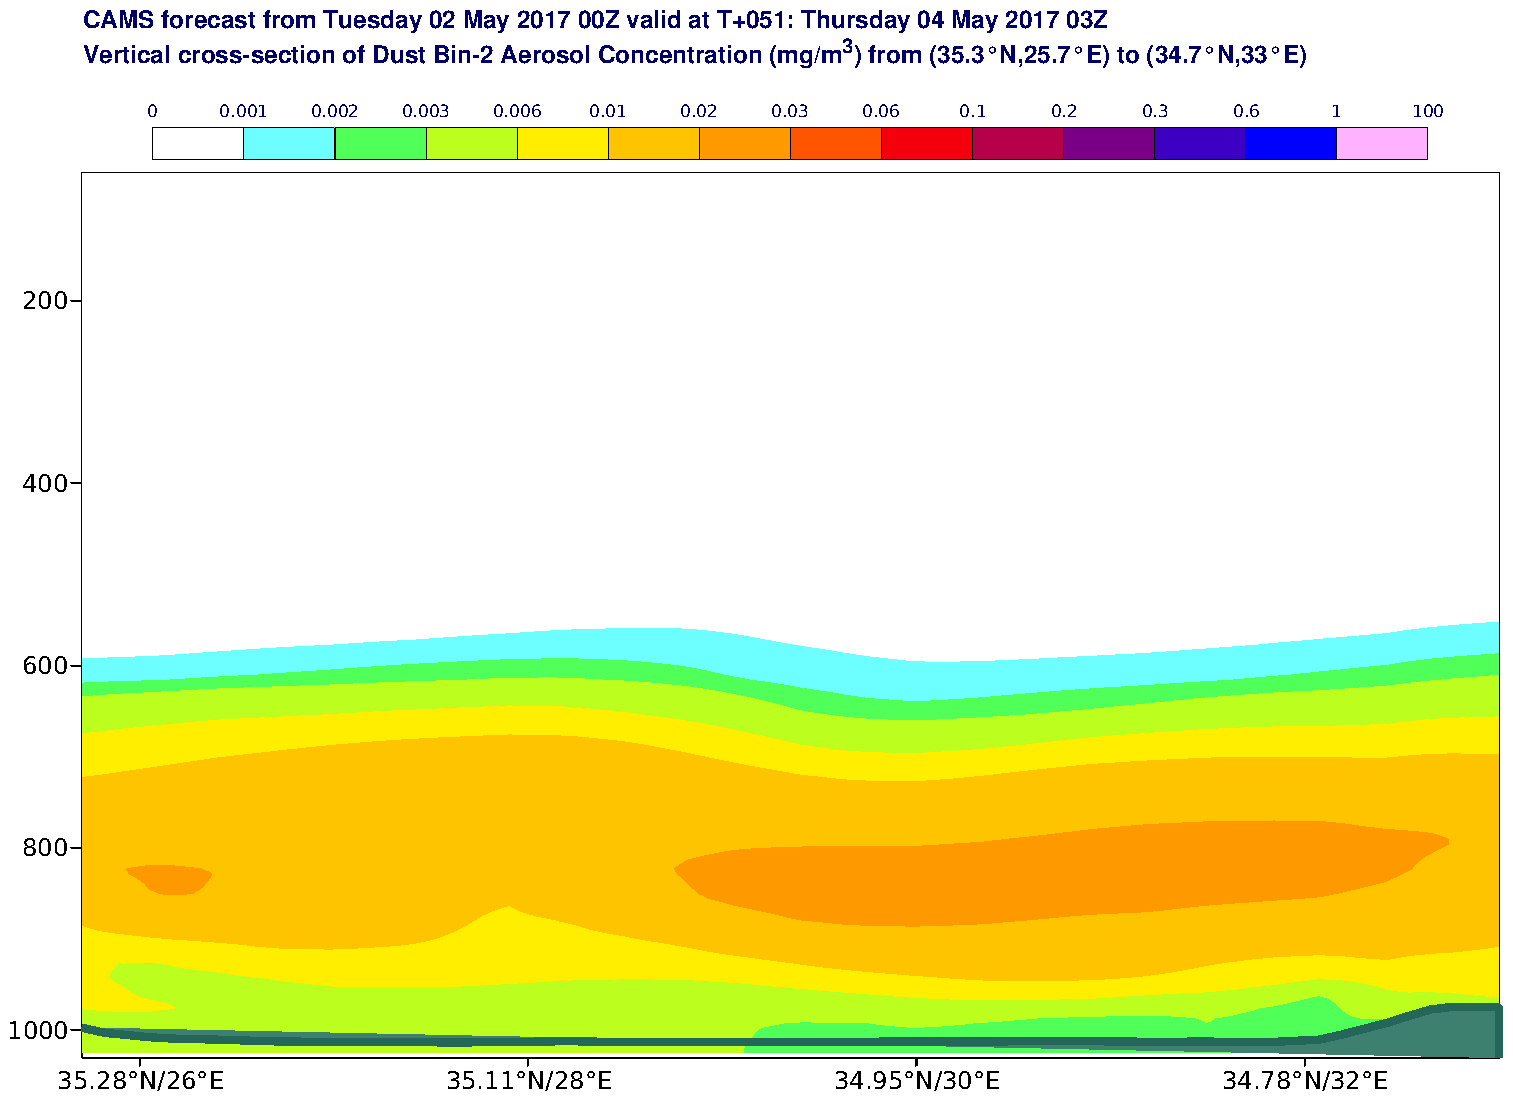 Vertical cross-section of Dust Bin-2 Aerosol Concentration (mg/m3) valid at T51 - 2017-05-04 03:00